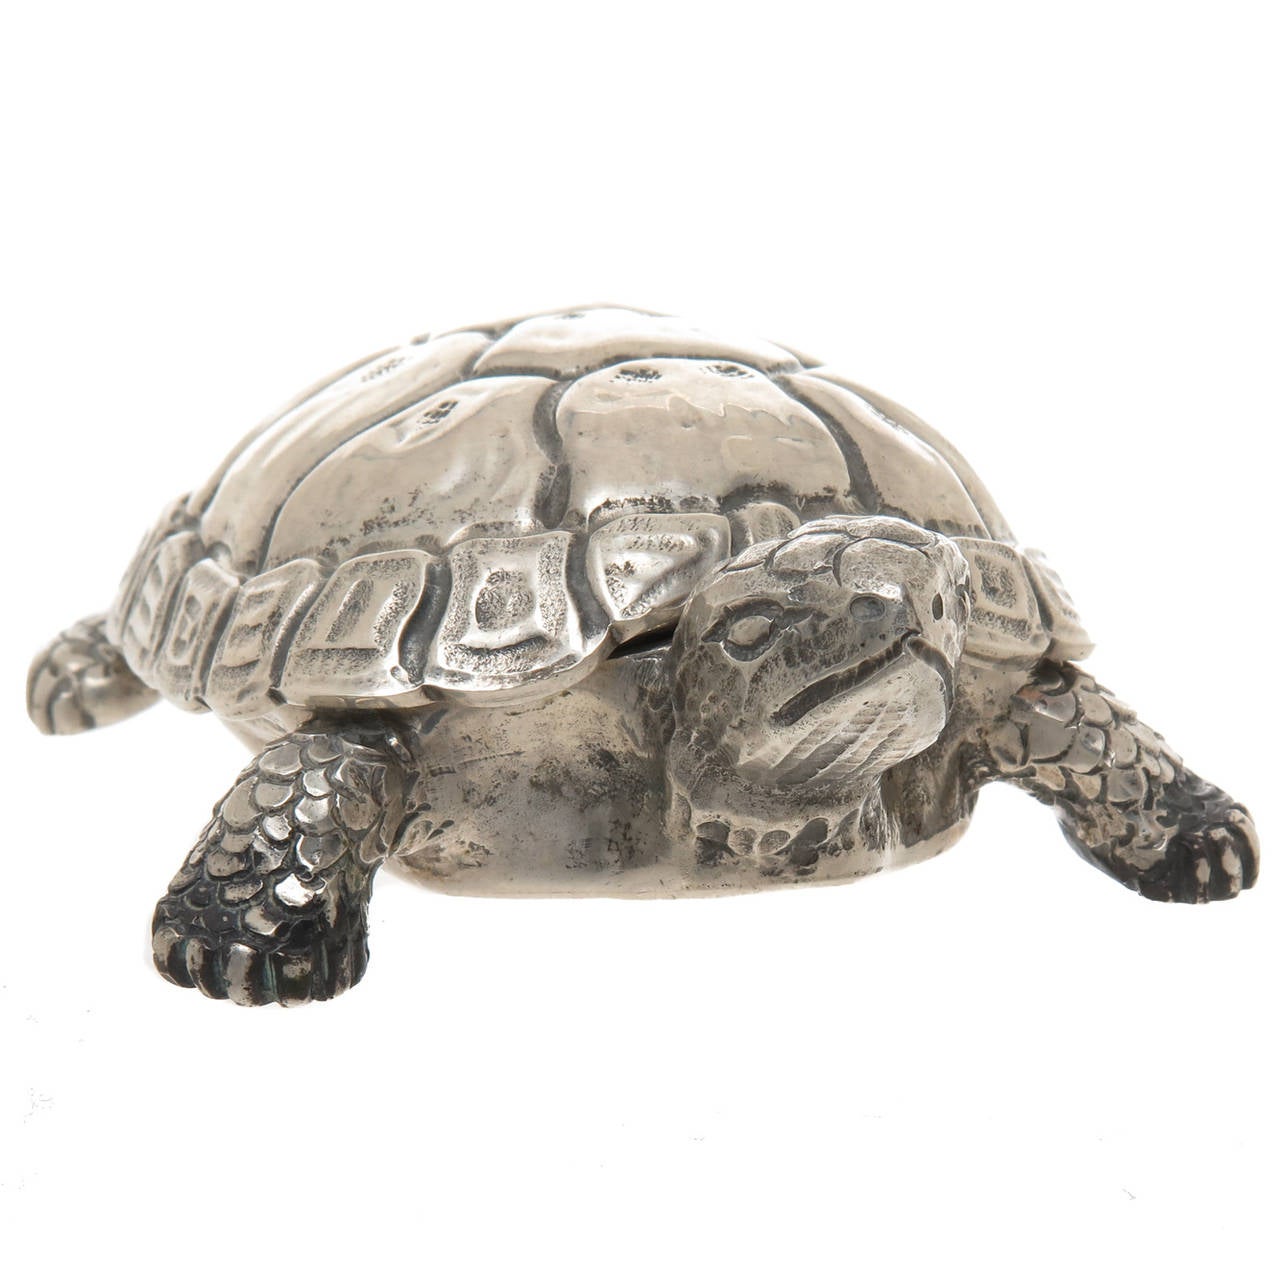 Circa 1990 Sterling Silver Turtle Form Trinket Box by Federico Buccellati, Italy. Very Well Detailed and measuring 4 3/8  X  2 3/4 Inch. With original Gift Box.